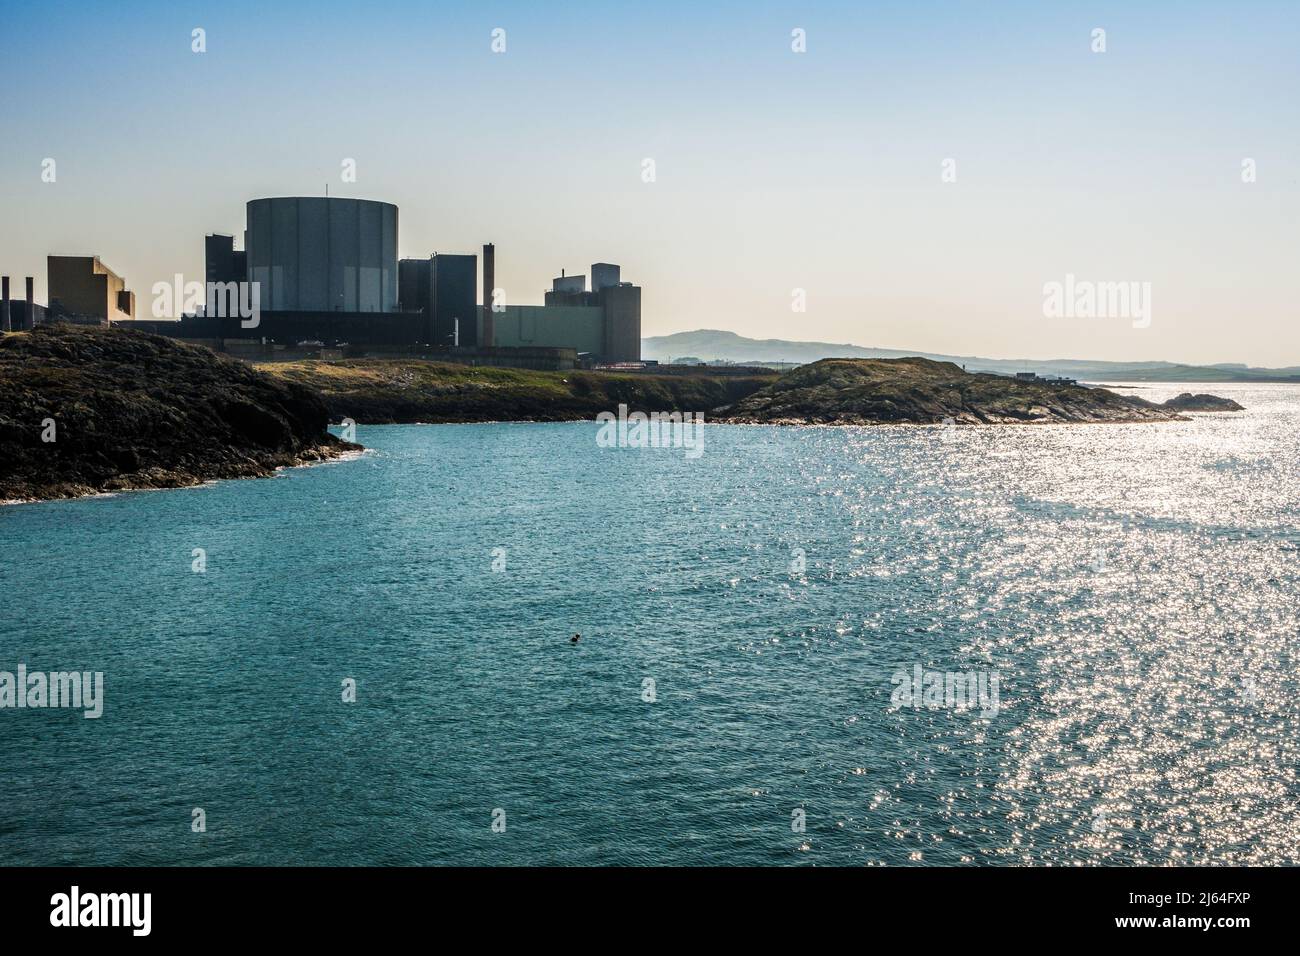 Wylfa nuclear power station on Anglesey, north Wales, is a Magnox nuclear power station currently being decommissioned Stock Photo